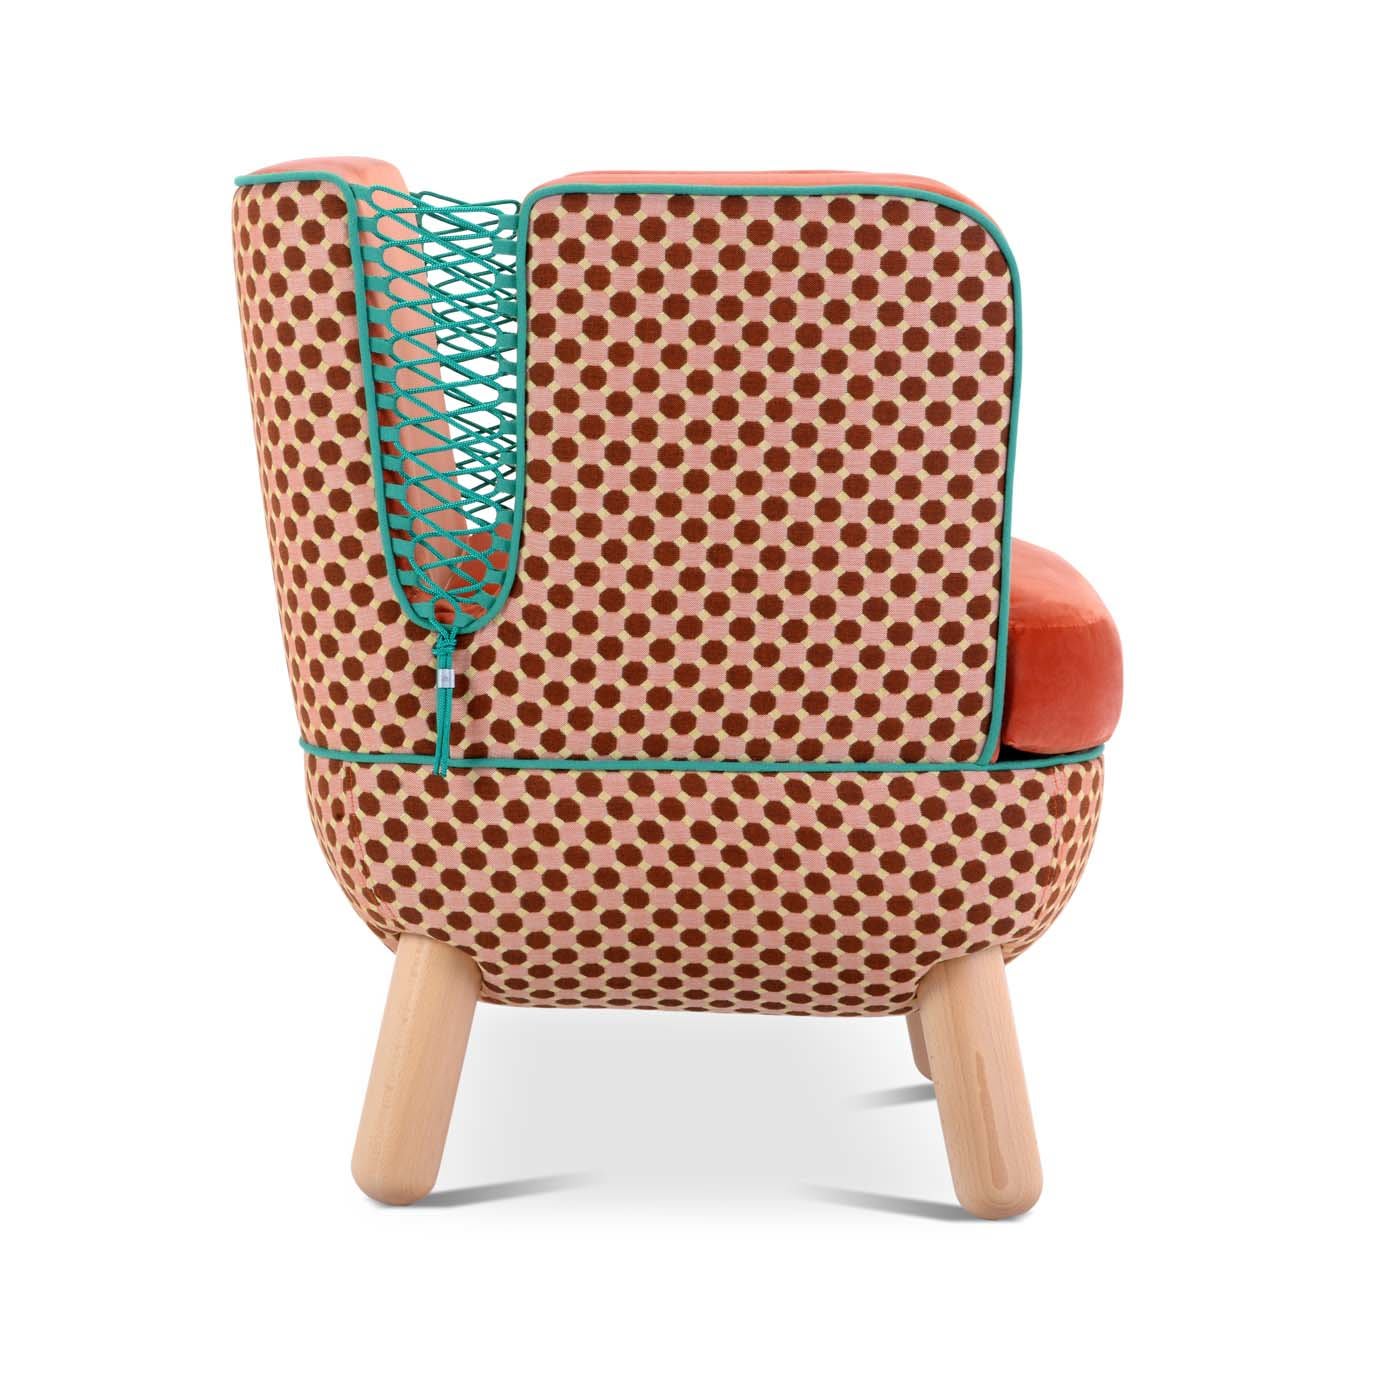 Sly Low Armchair with Ropes By Italo Pertichini rombi - Adrenalina